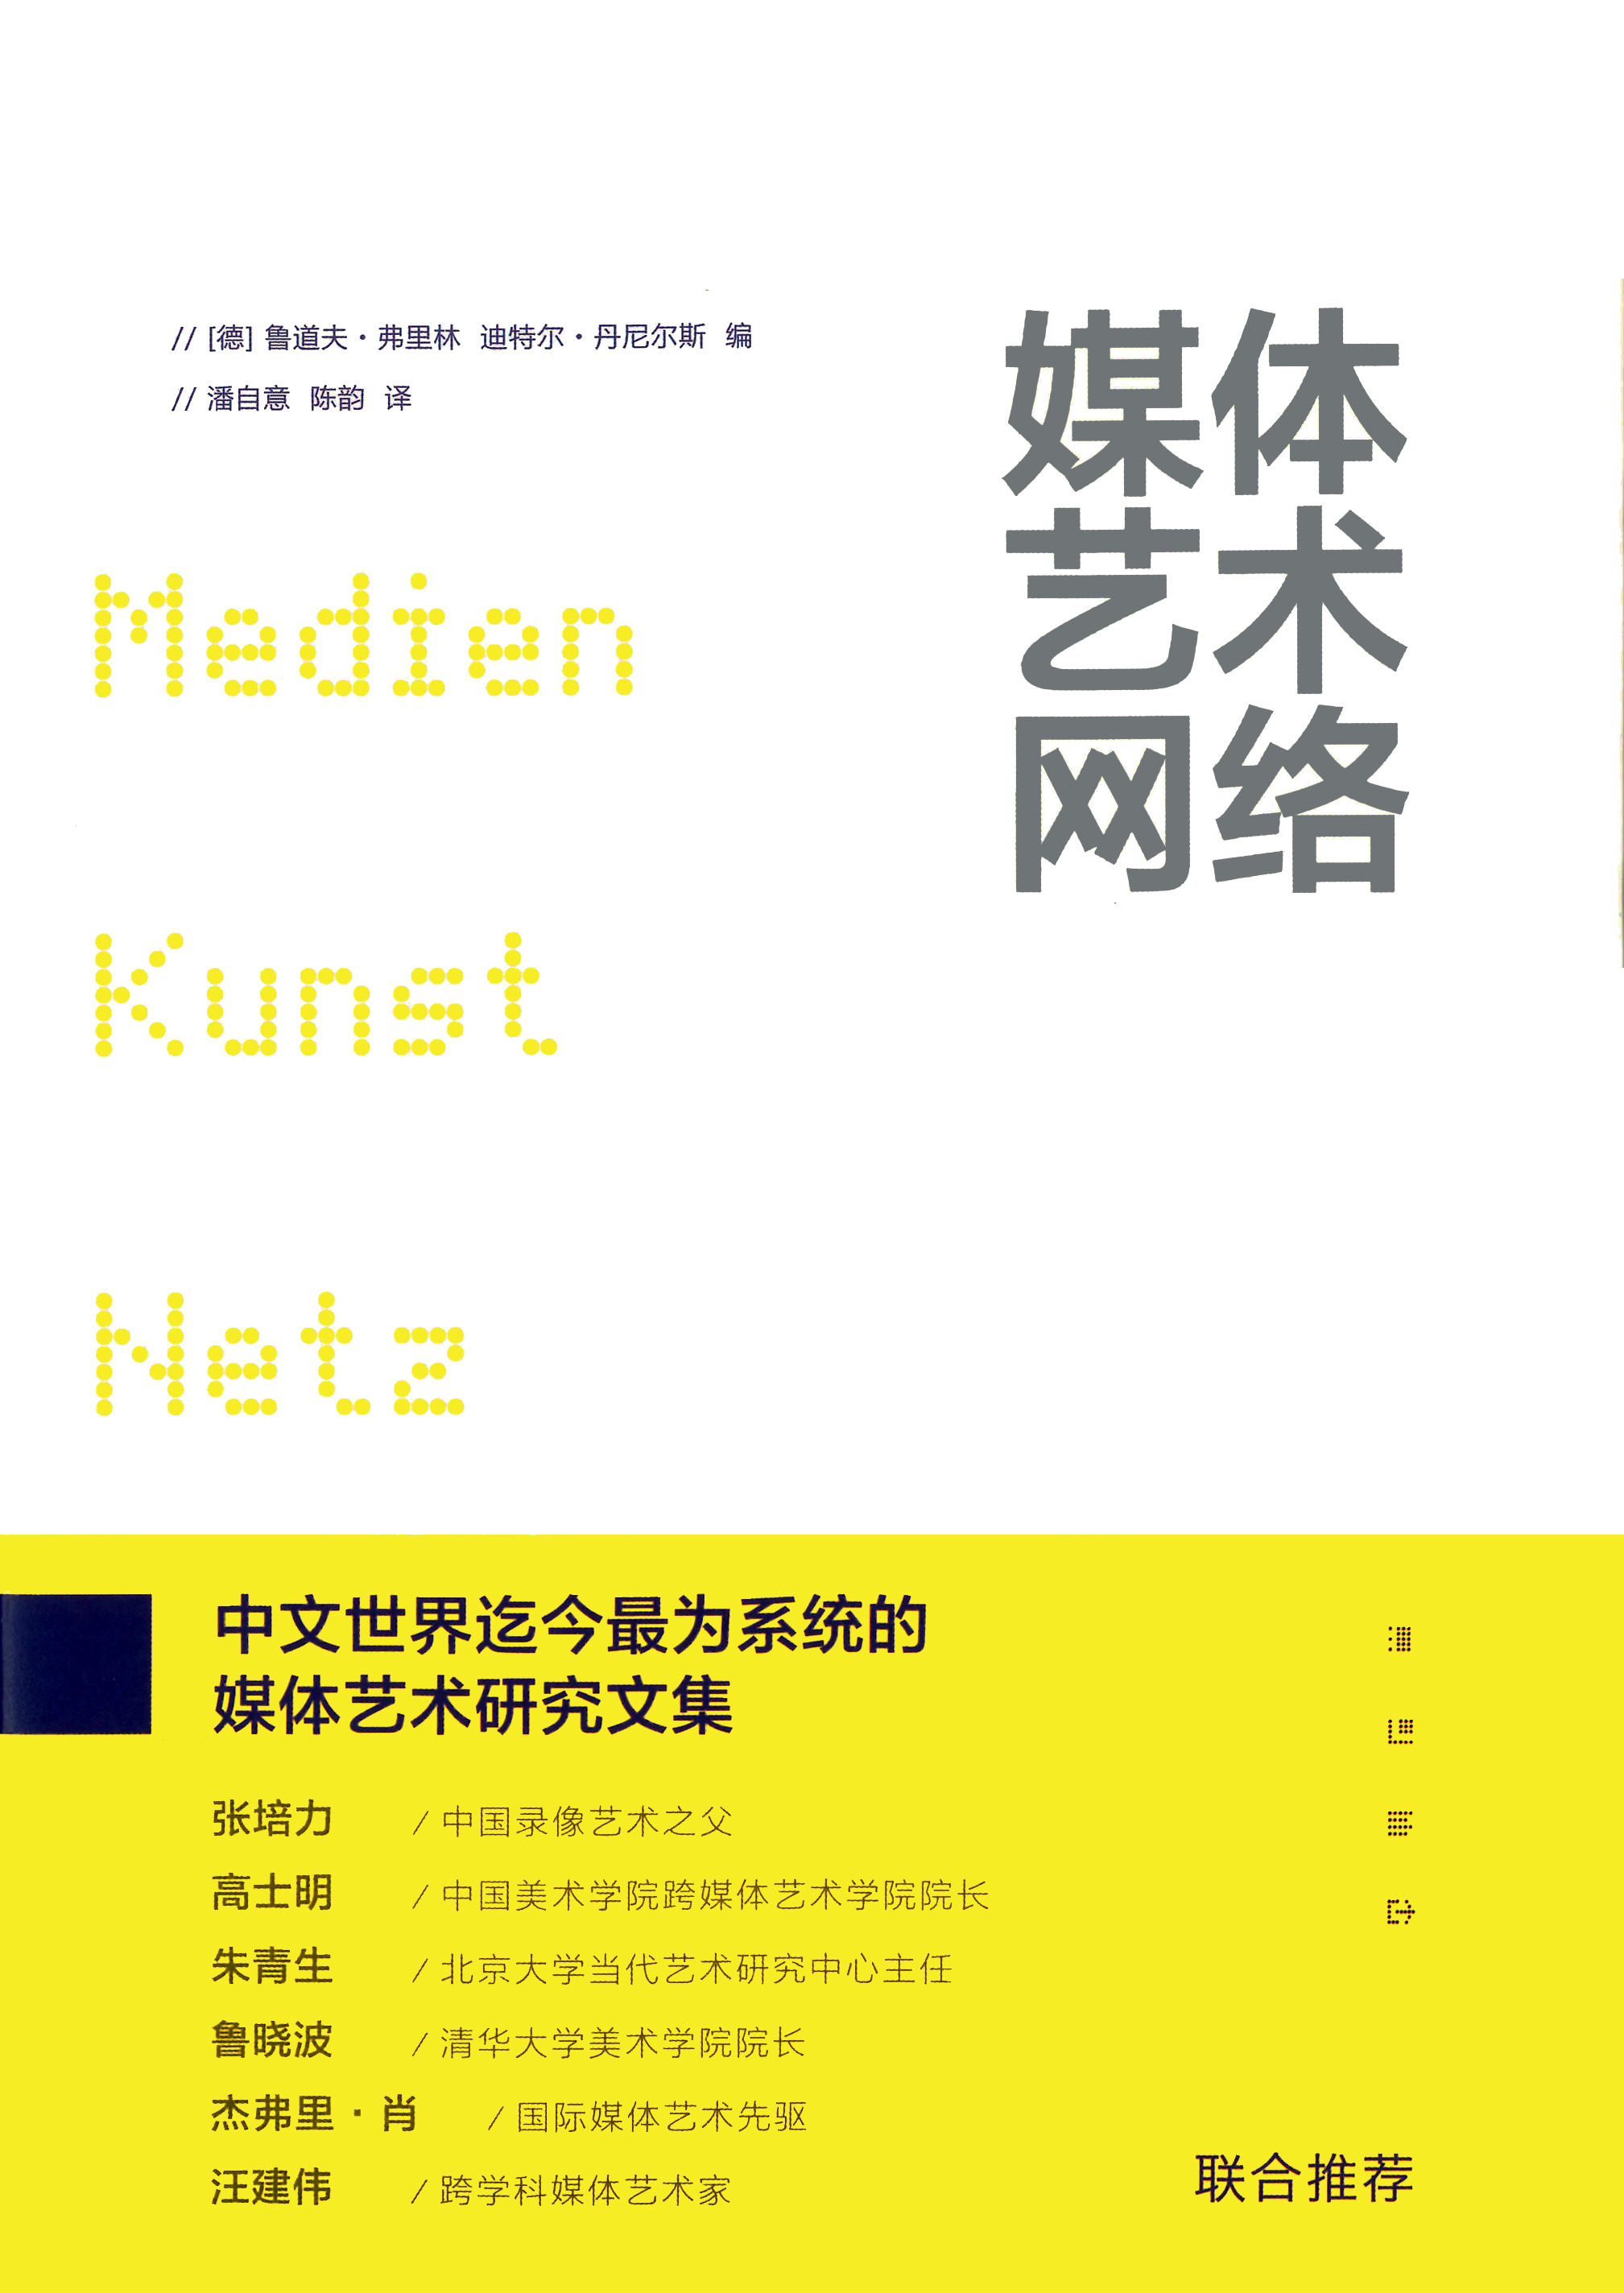 Cover of the chinese Version of the publication »Media Art Net 1«